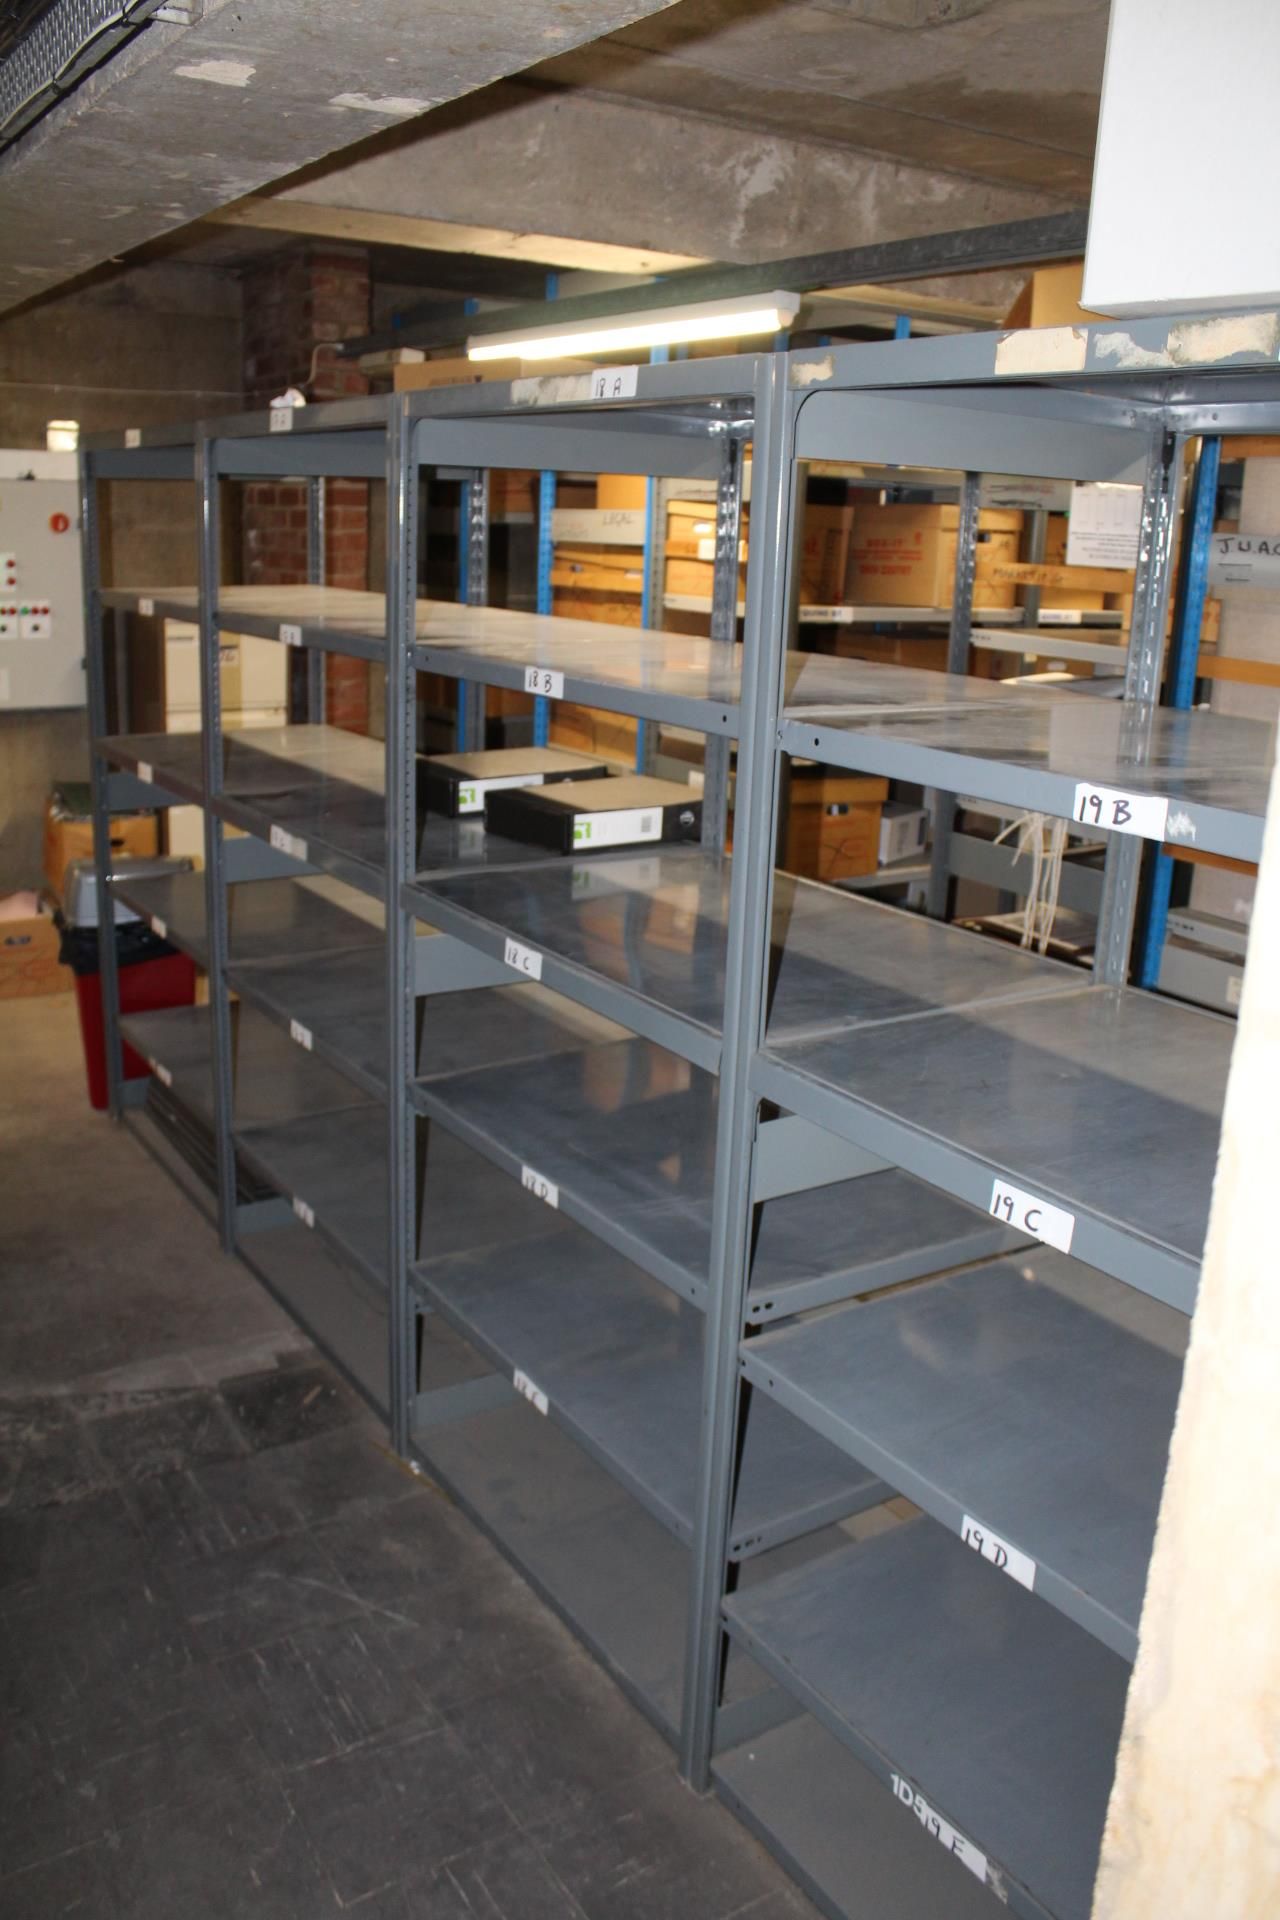 Nine Bay Three Tier Stock Rack (reserve removal until contents cleared) - Image 2 of 2